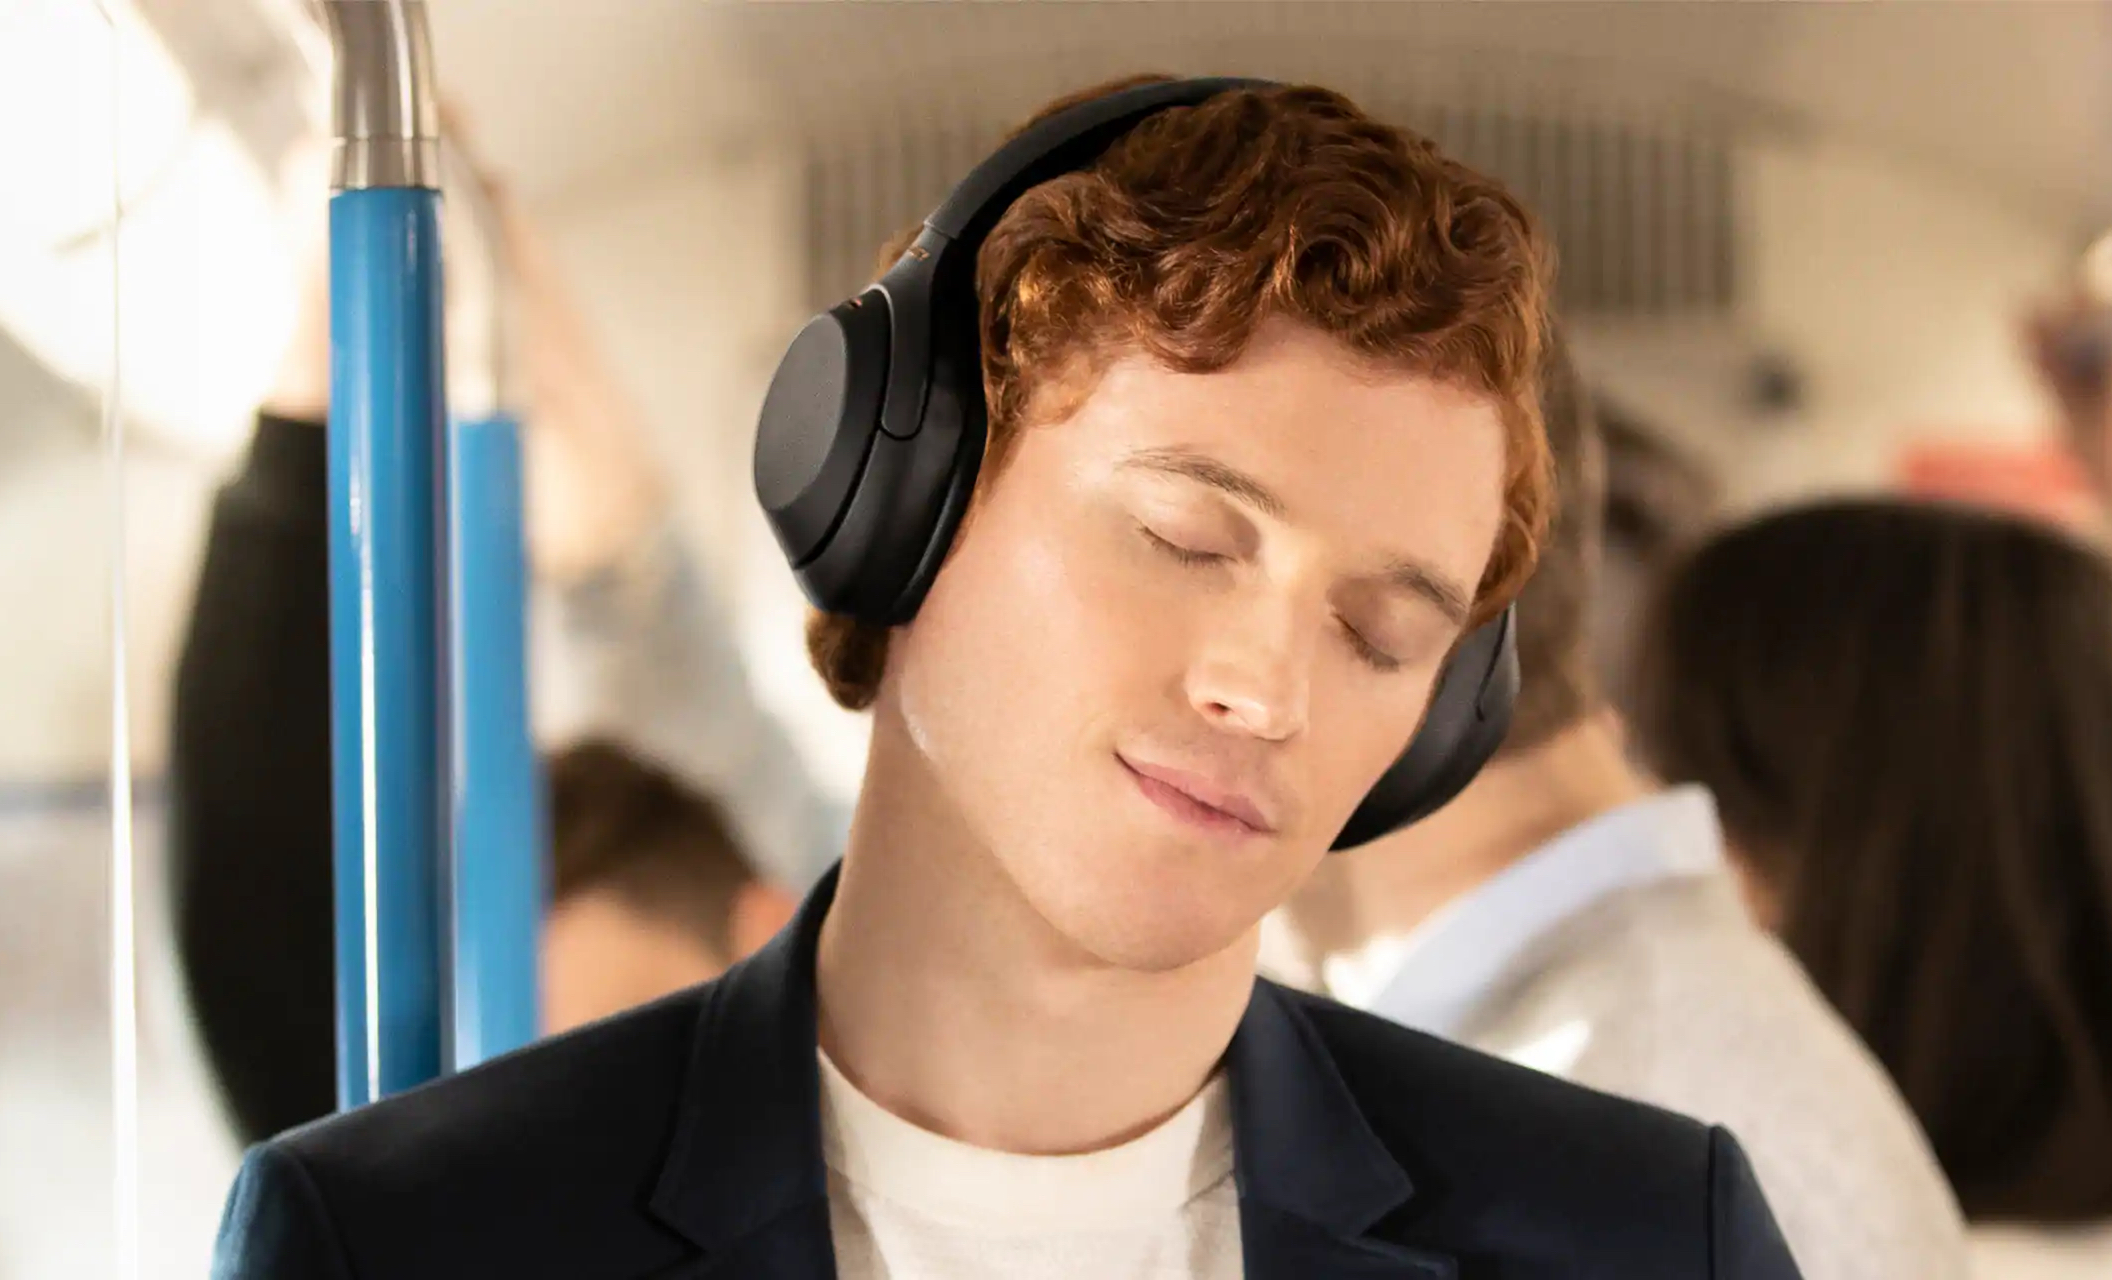 Sony’s new WH-1000XM4 industry leading noise cancelling headphones are currently cheaper than ever